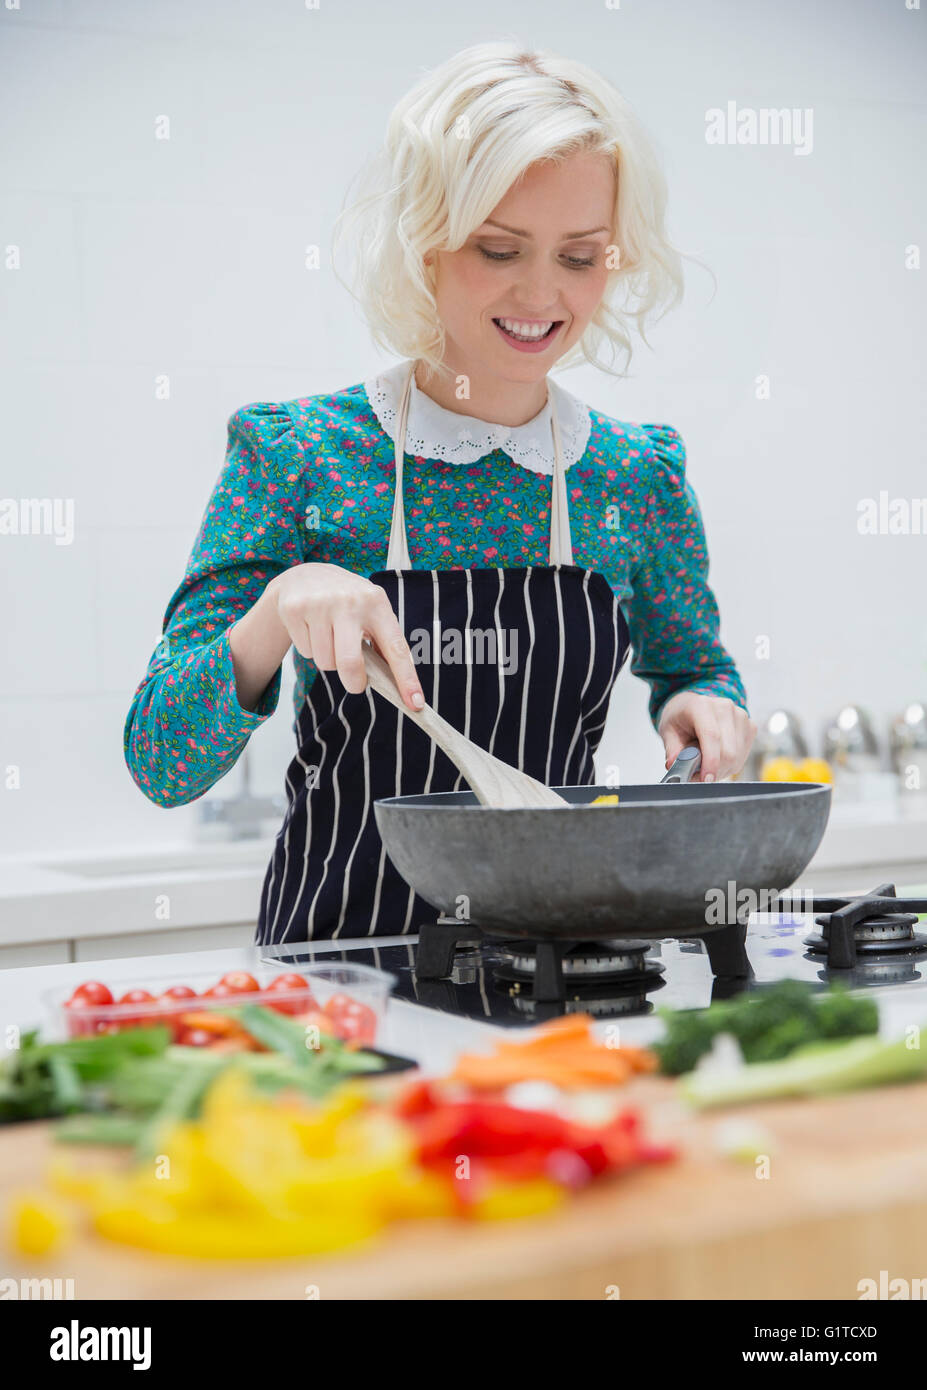 Smiling woman in apron cooking in kitchen Stock Photo